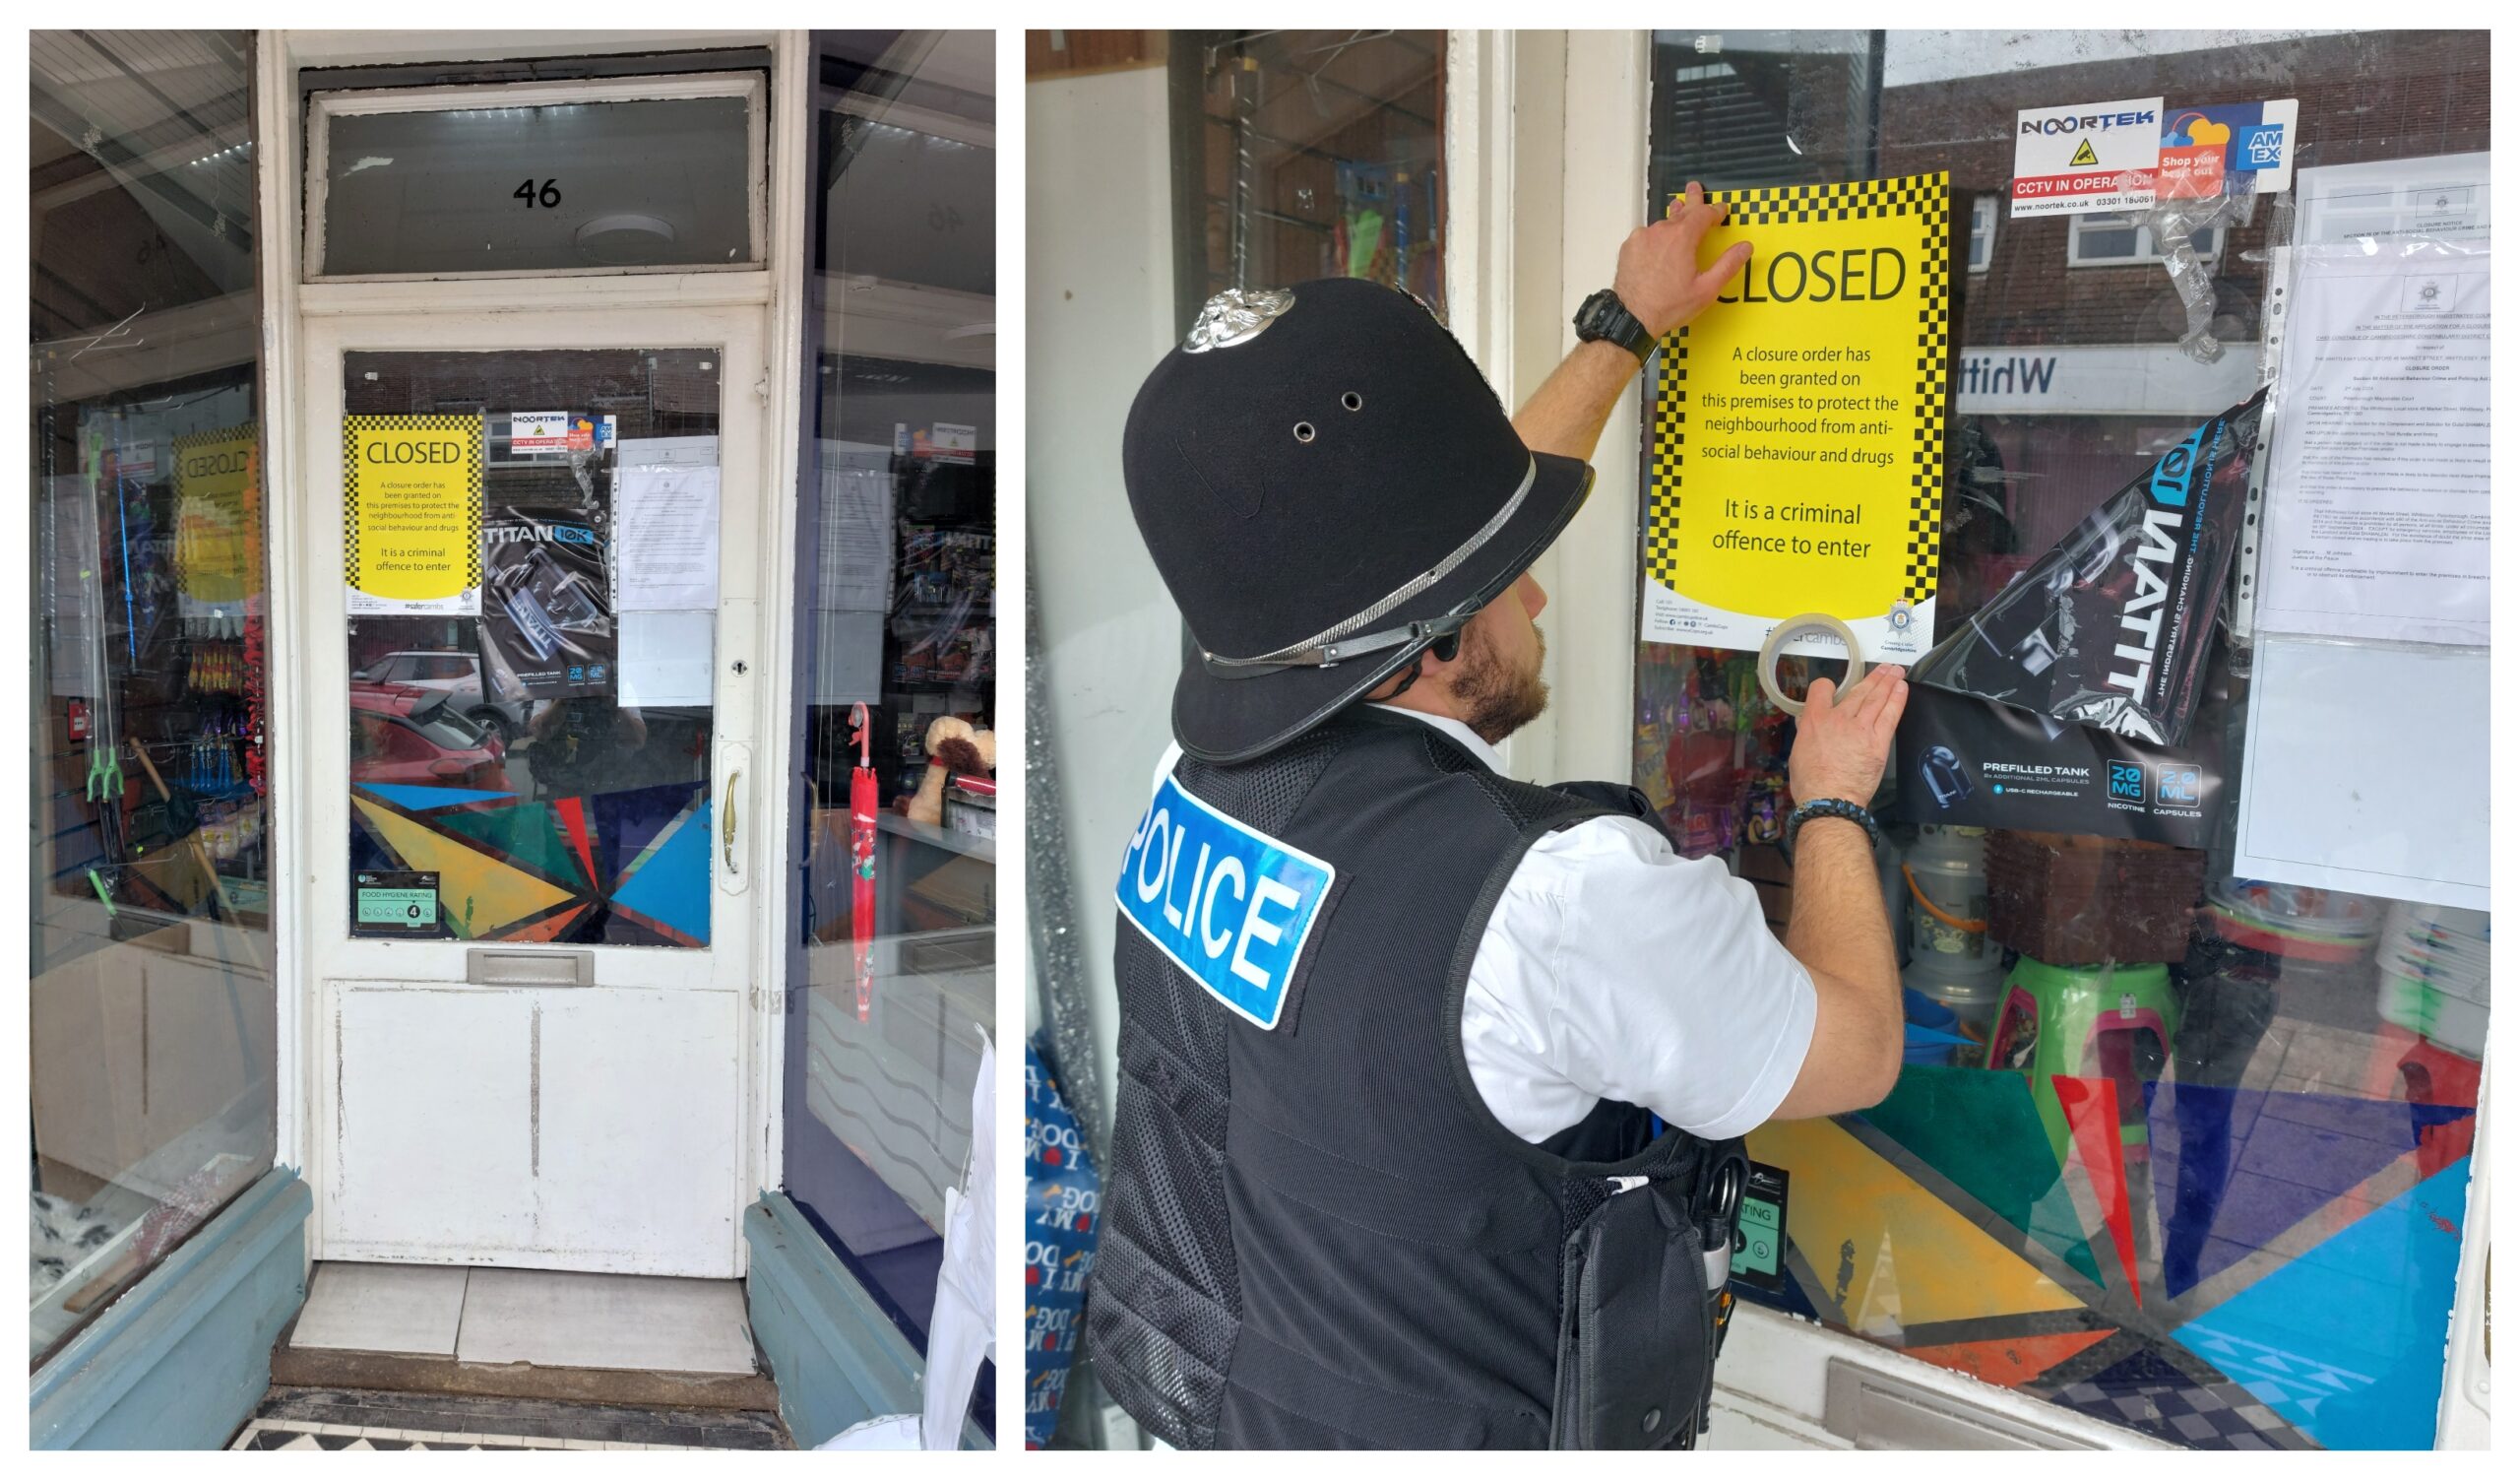 The partial closure order was served on The Whittlesey Local Store, 46 Market Street, Whittlesey, yesterday afternoon (Tuesday) by the Neighbourhood Support Team following a successful application at Peterborough Magistrates’ Court.